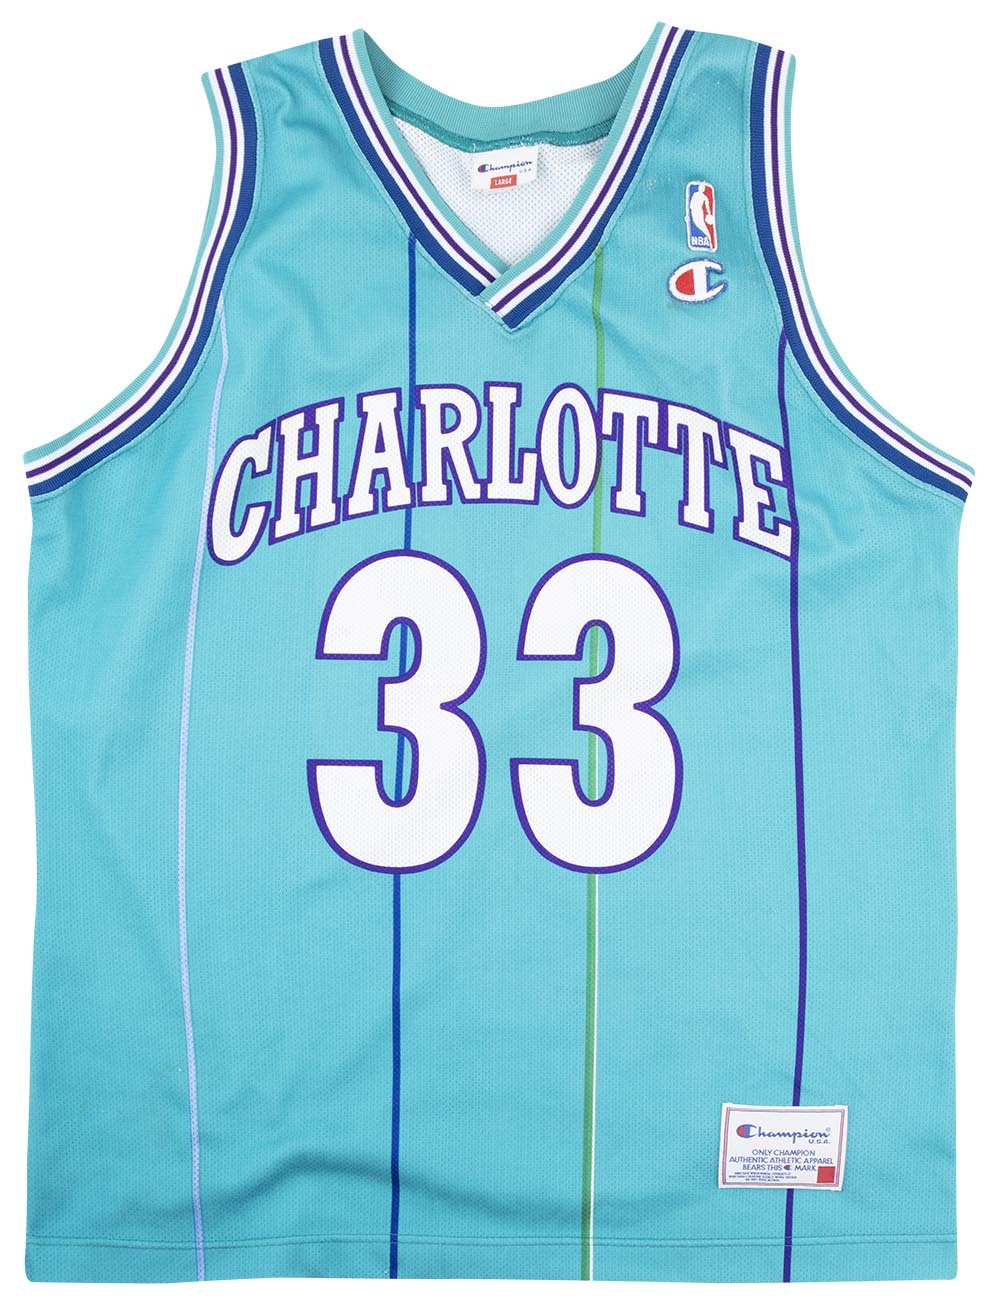 1992-95 CHARLOTTE HORNETS MOURNING #33 CHAMPION JERSEY (AWAY) L